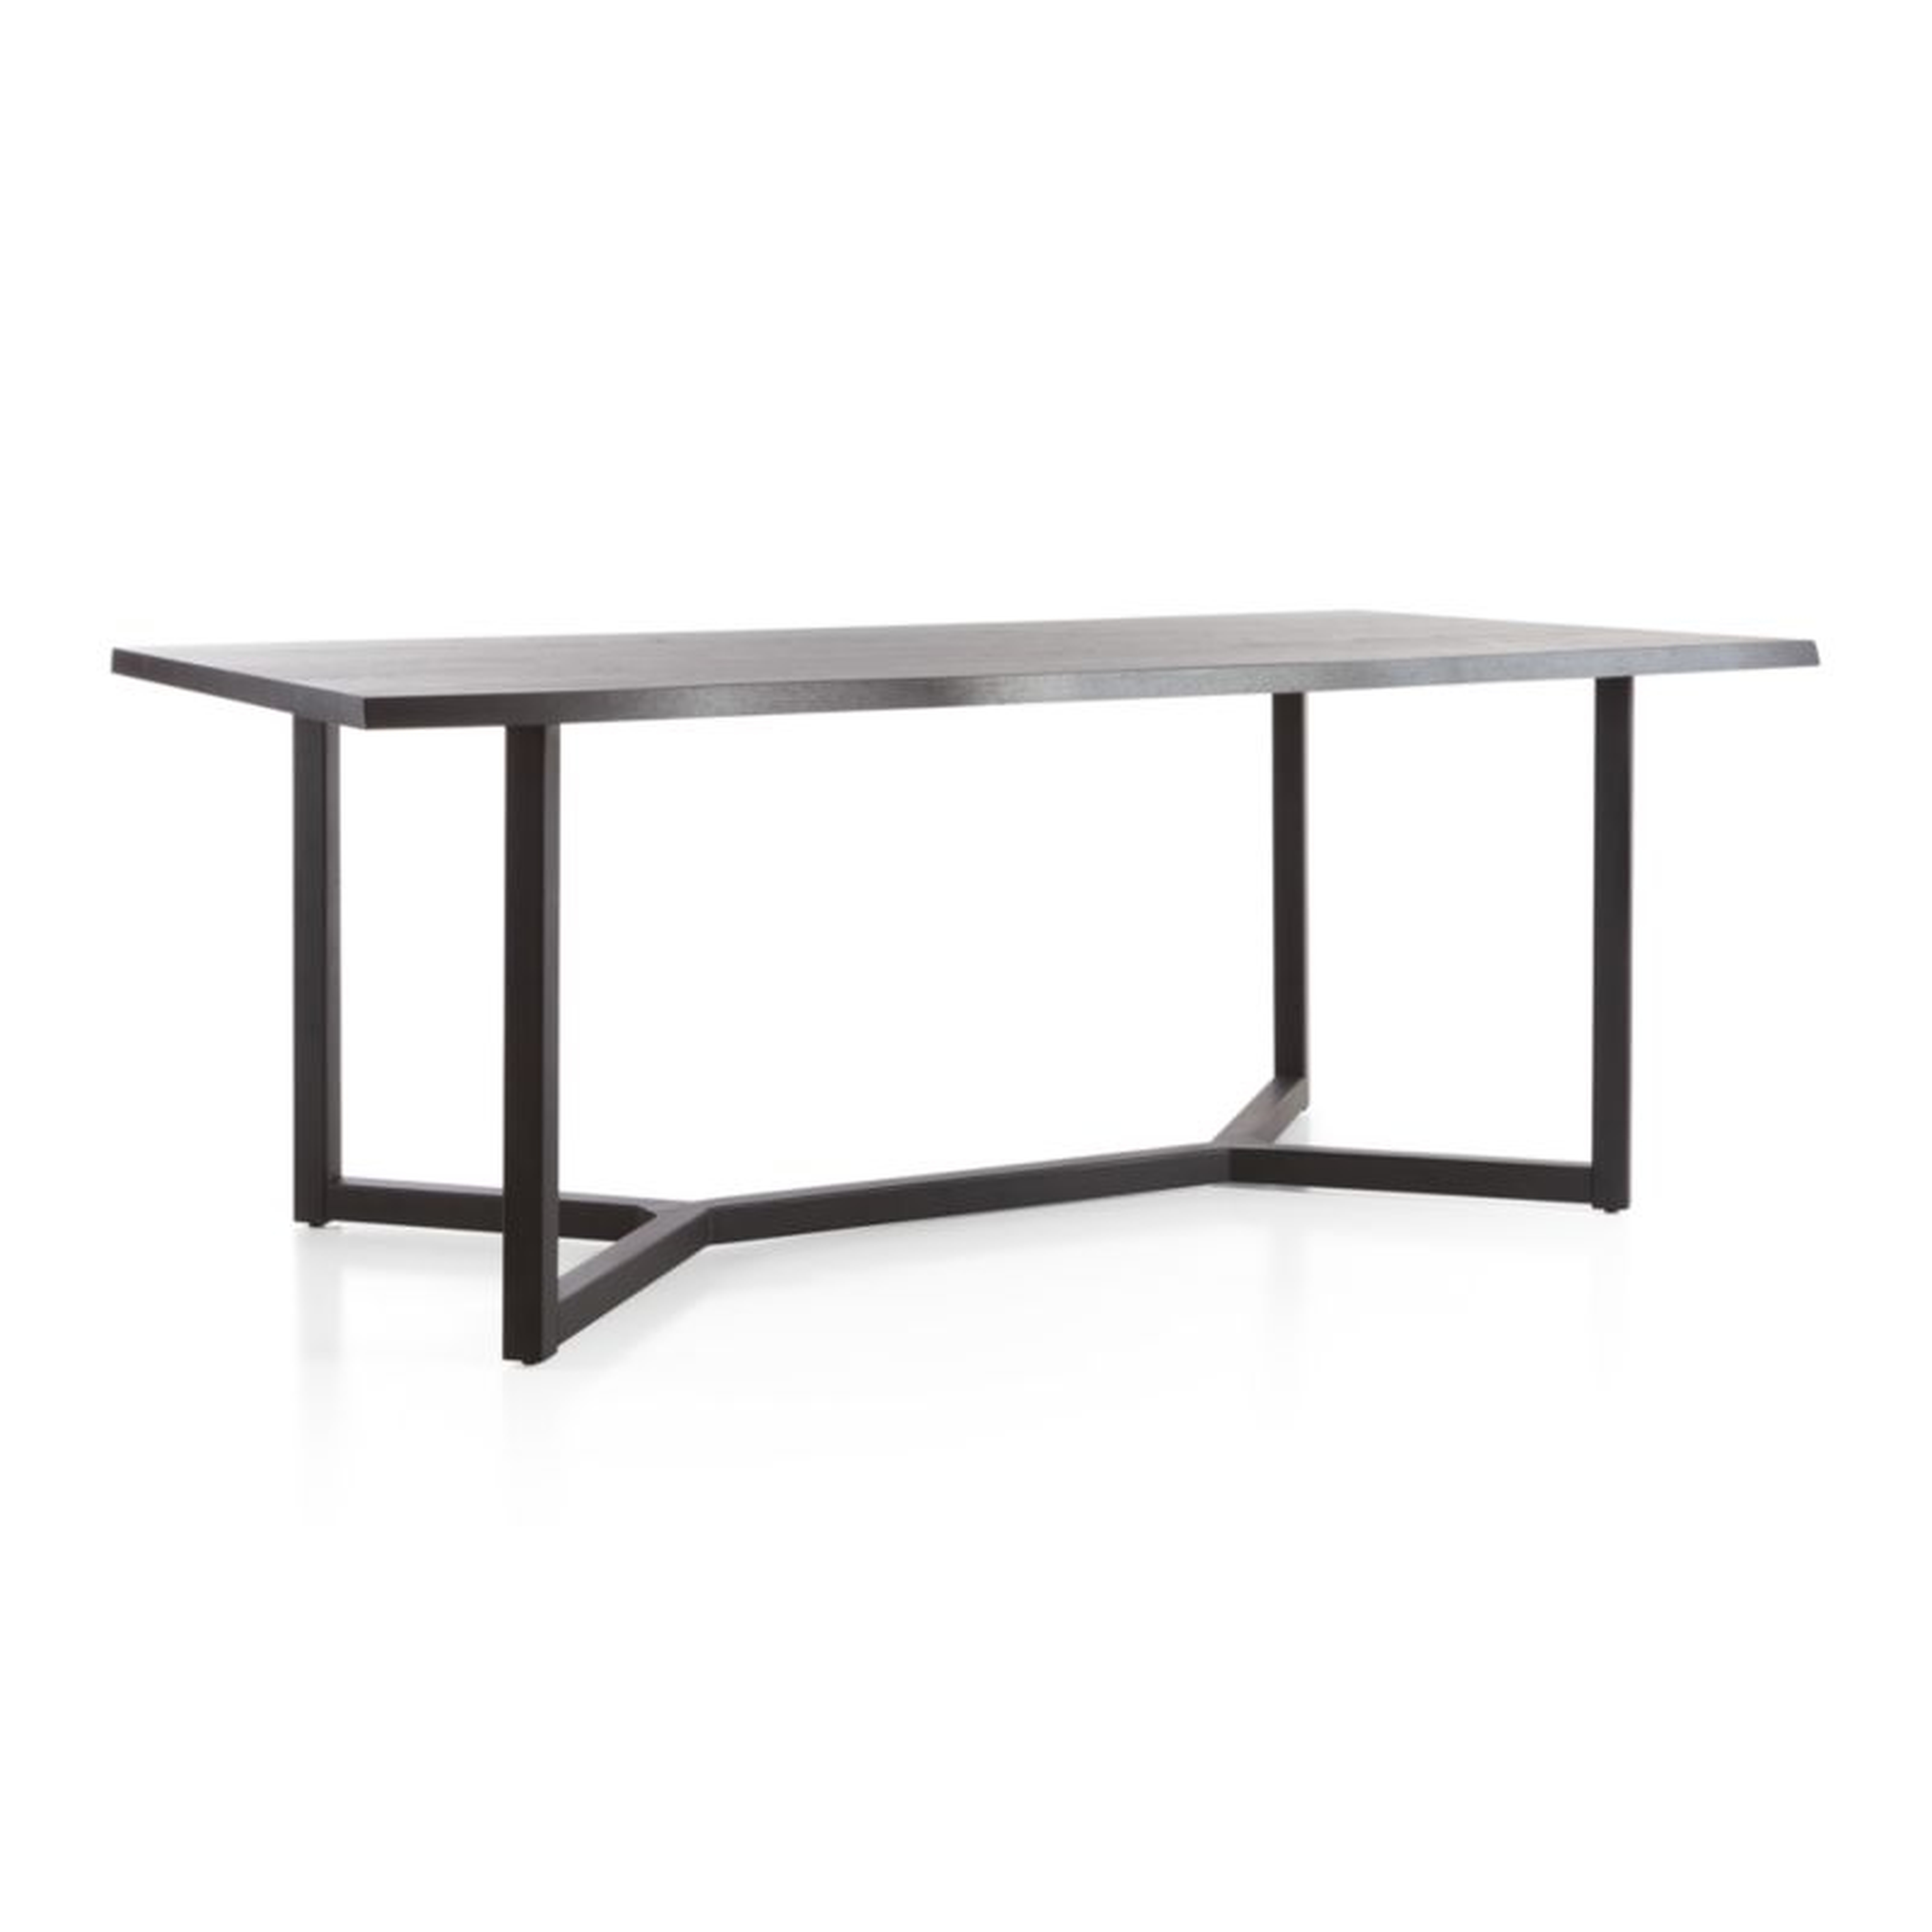 Verge 100" Black Live Edge Dining Table - Crate and Barrel